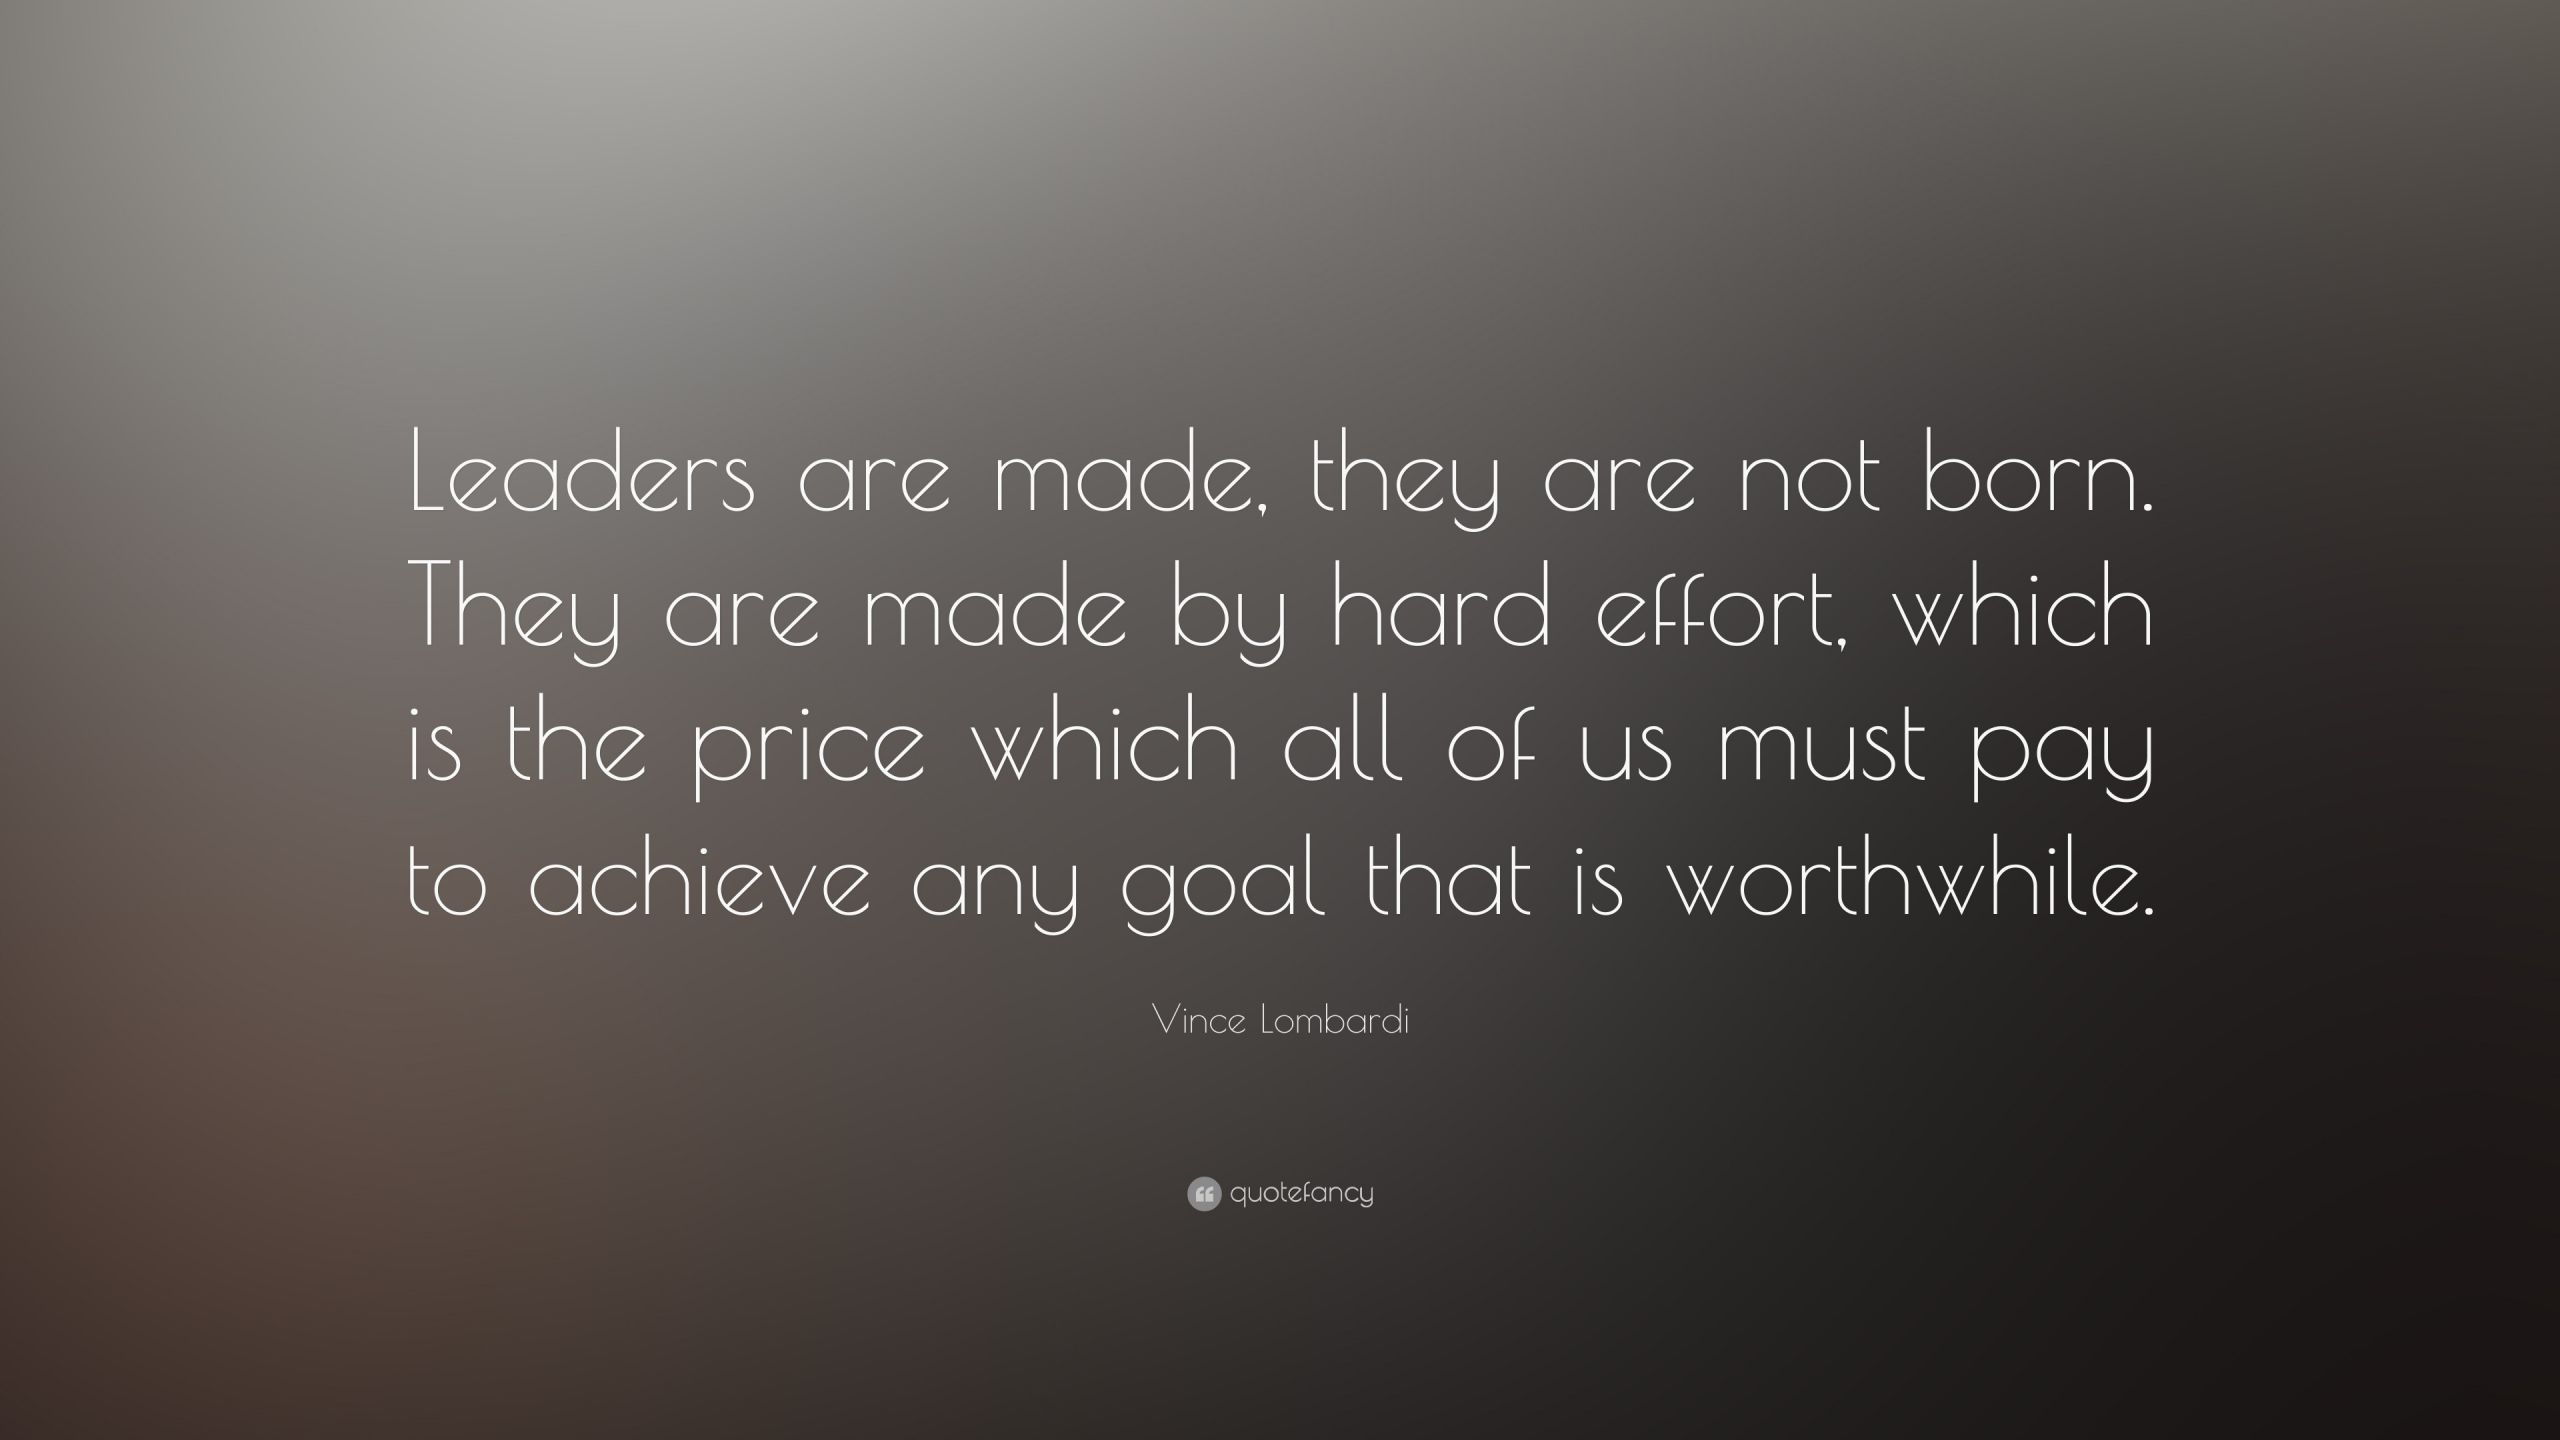 Vince Lombardi Quotes On Leadership
 Vince Lombardi Quote “Leaders aren t born they are made